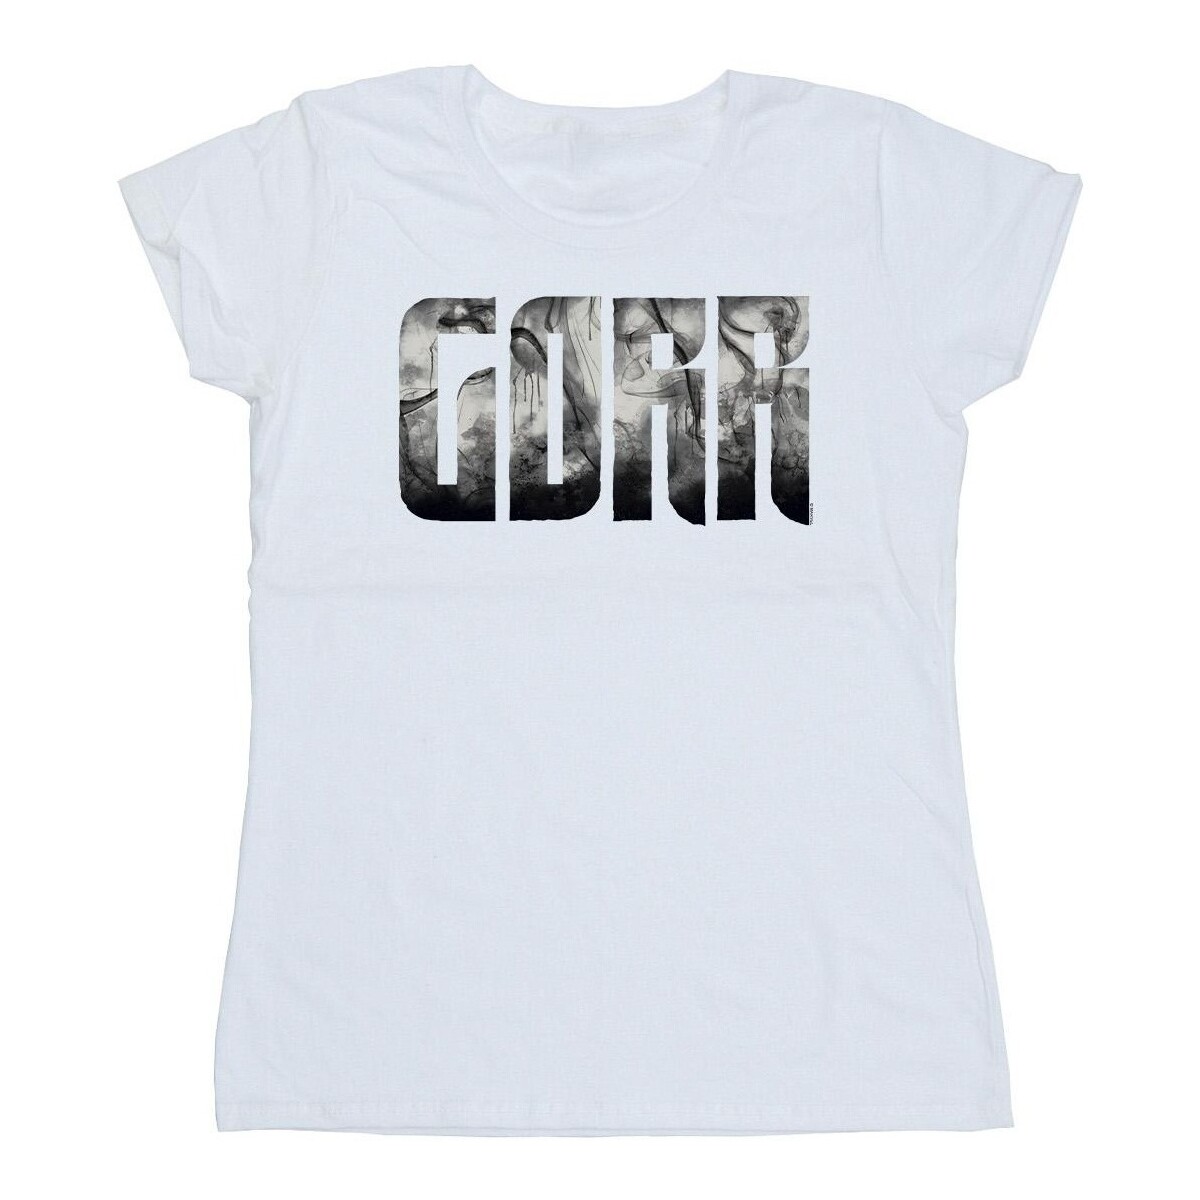 Vêtements Femme T-shirts manches longues Marvel Thor Love And Thunder Gorr Chest Blanc